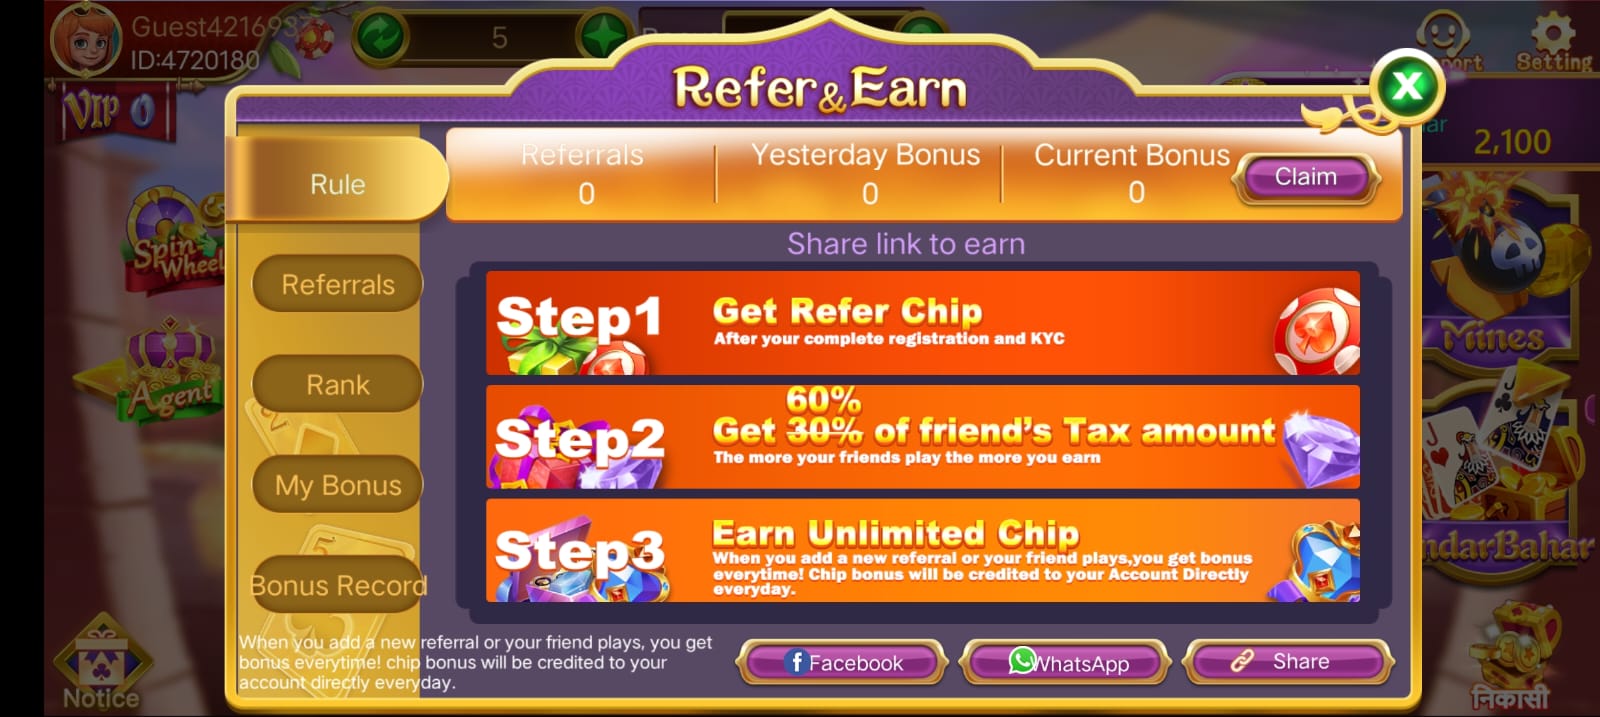 REFER AND EARN IN RUMMY HELLO APP